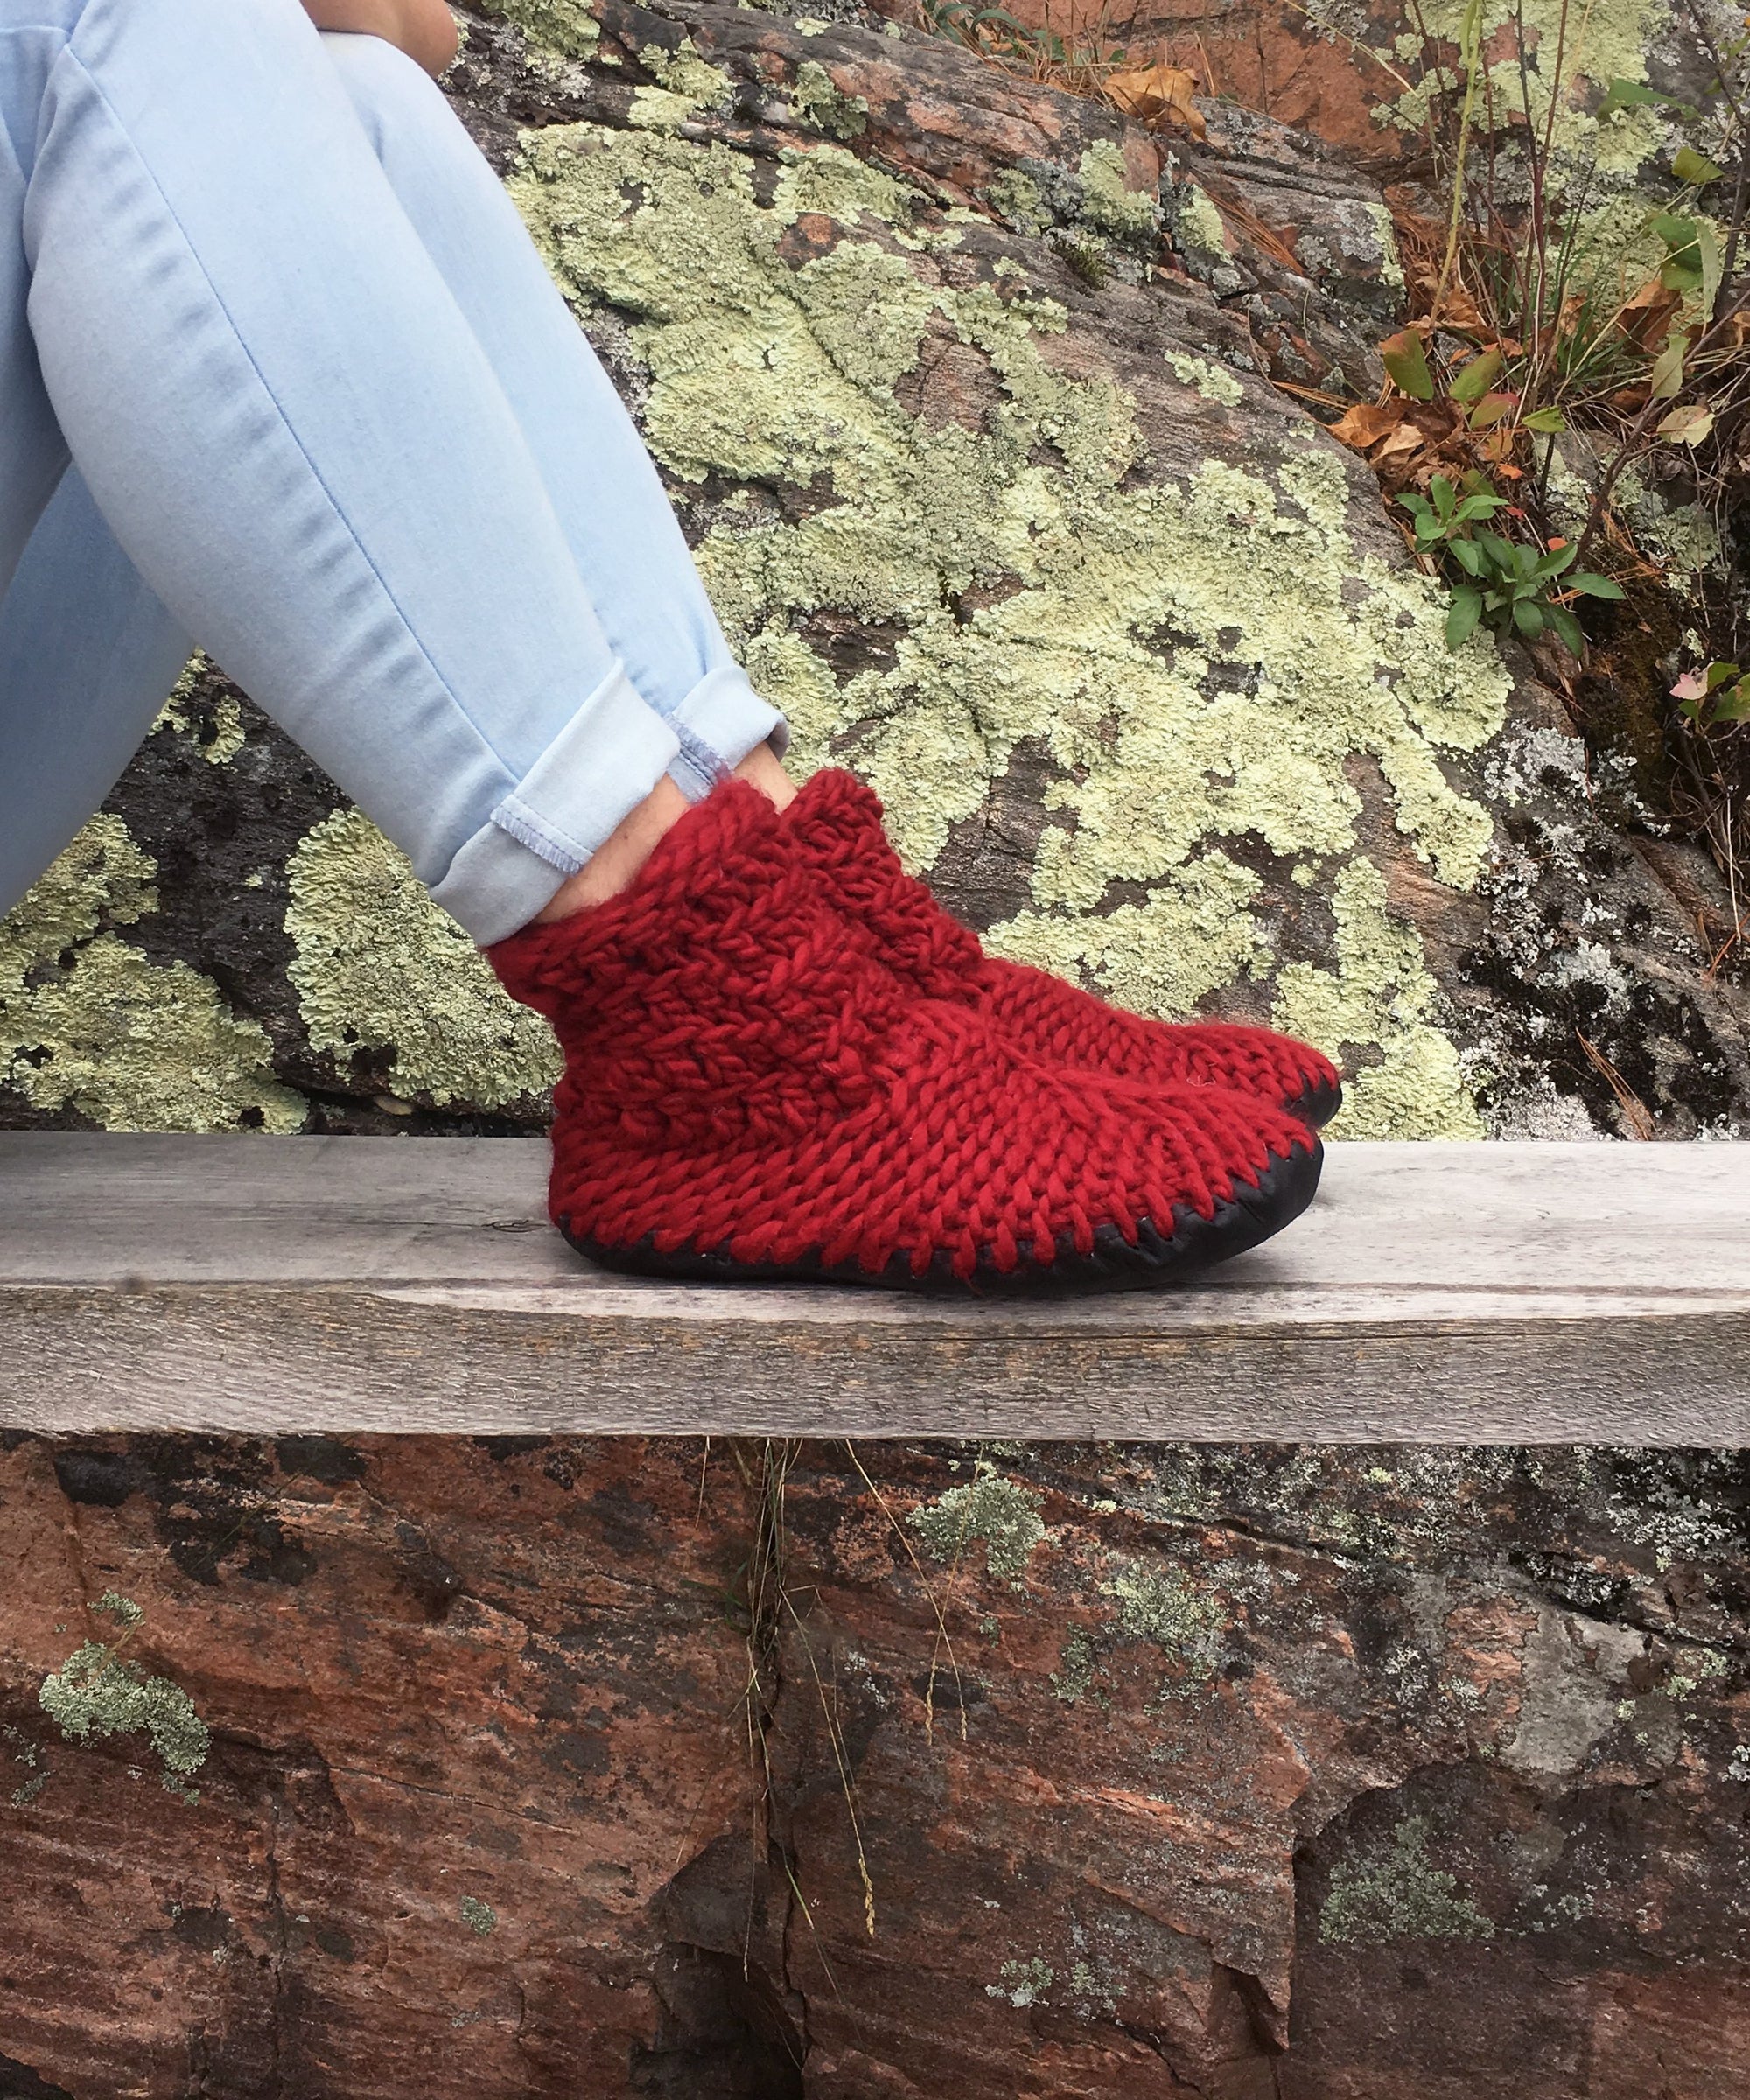 Demi-Boot: Cranberry, Red Merino Wool Bootie Slipper with Leather Sole